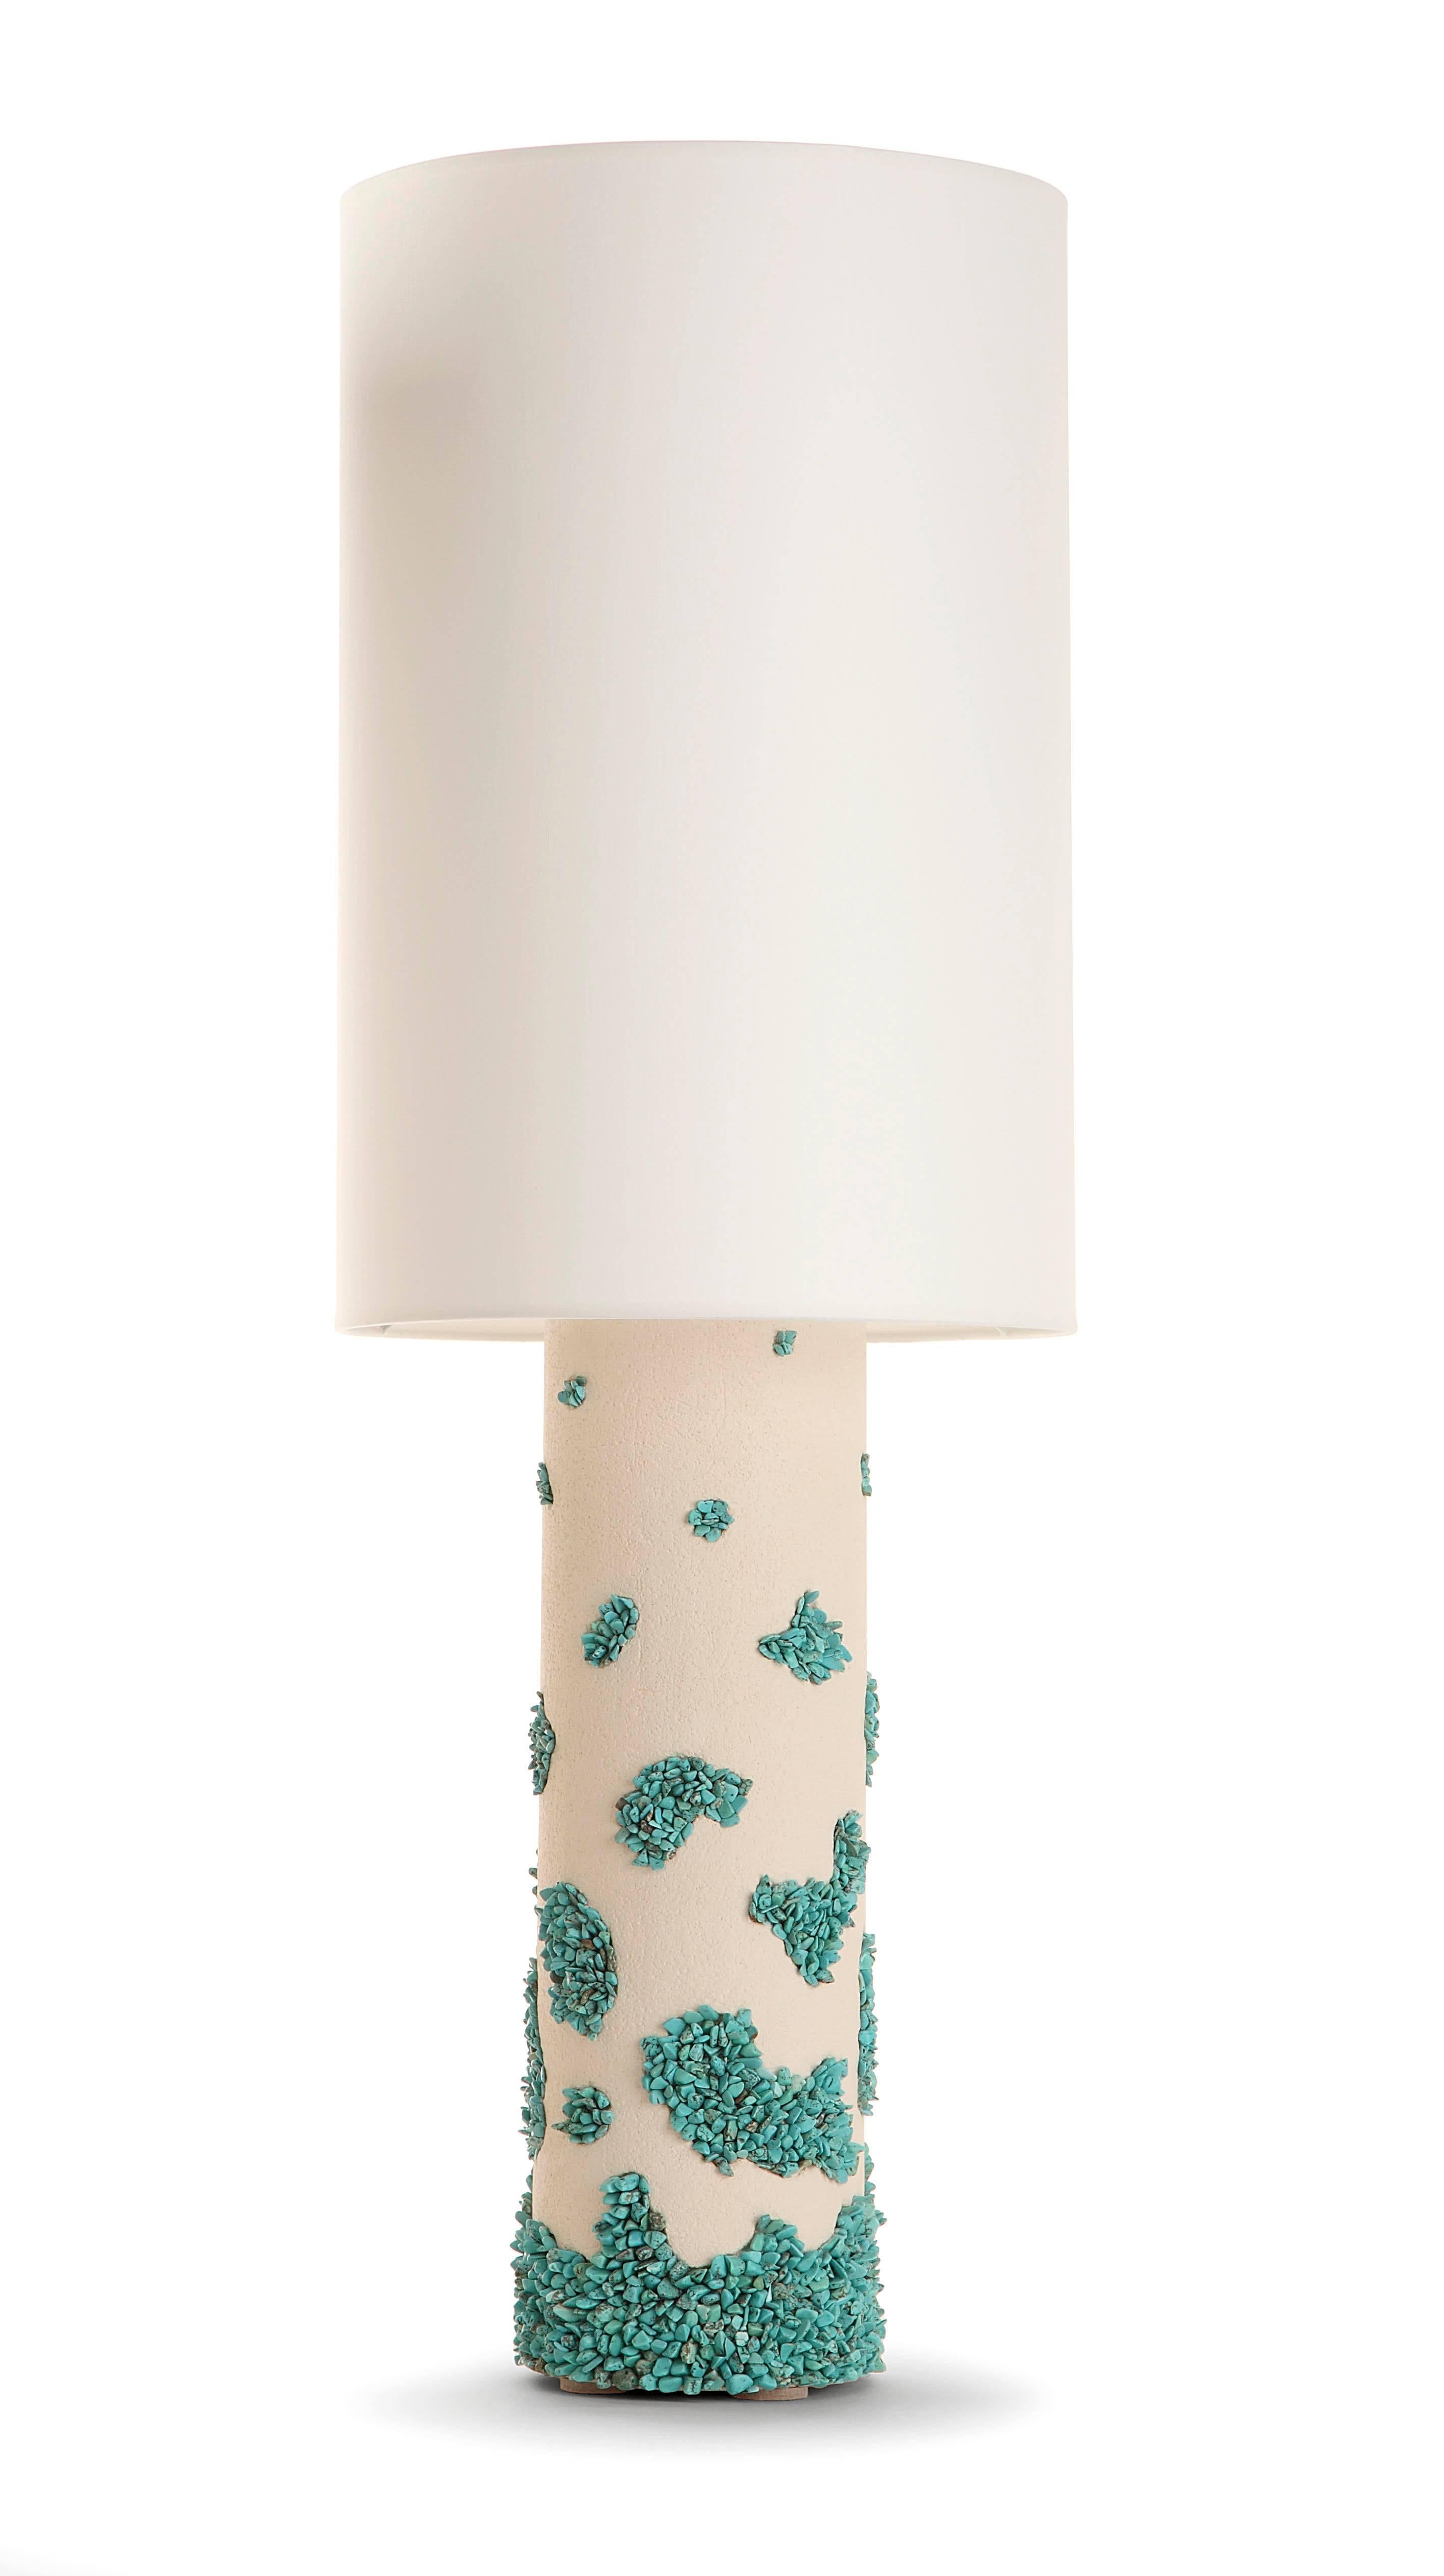 Contemporain white ceramic and turquoise Howlite Lampes
Measure: Height with shade 83 cm / without shade, ceramic only: 40 cm
Handmade creation 2017.

Price is for the pair (but possibility to separate)


Note: Before using, our international